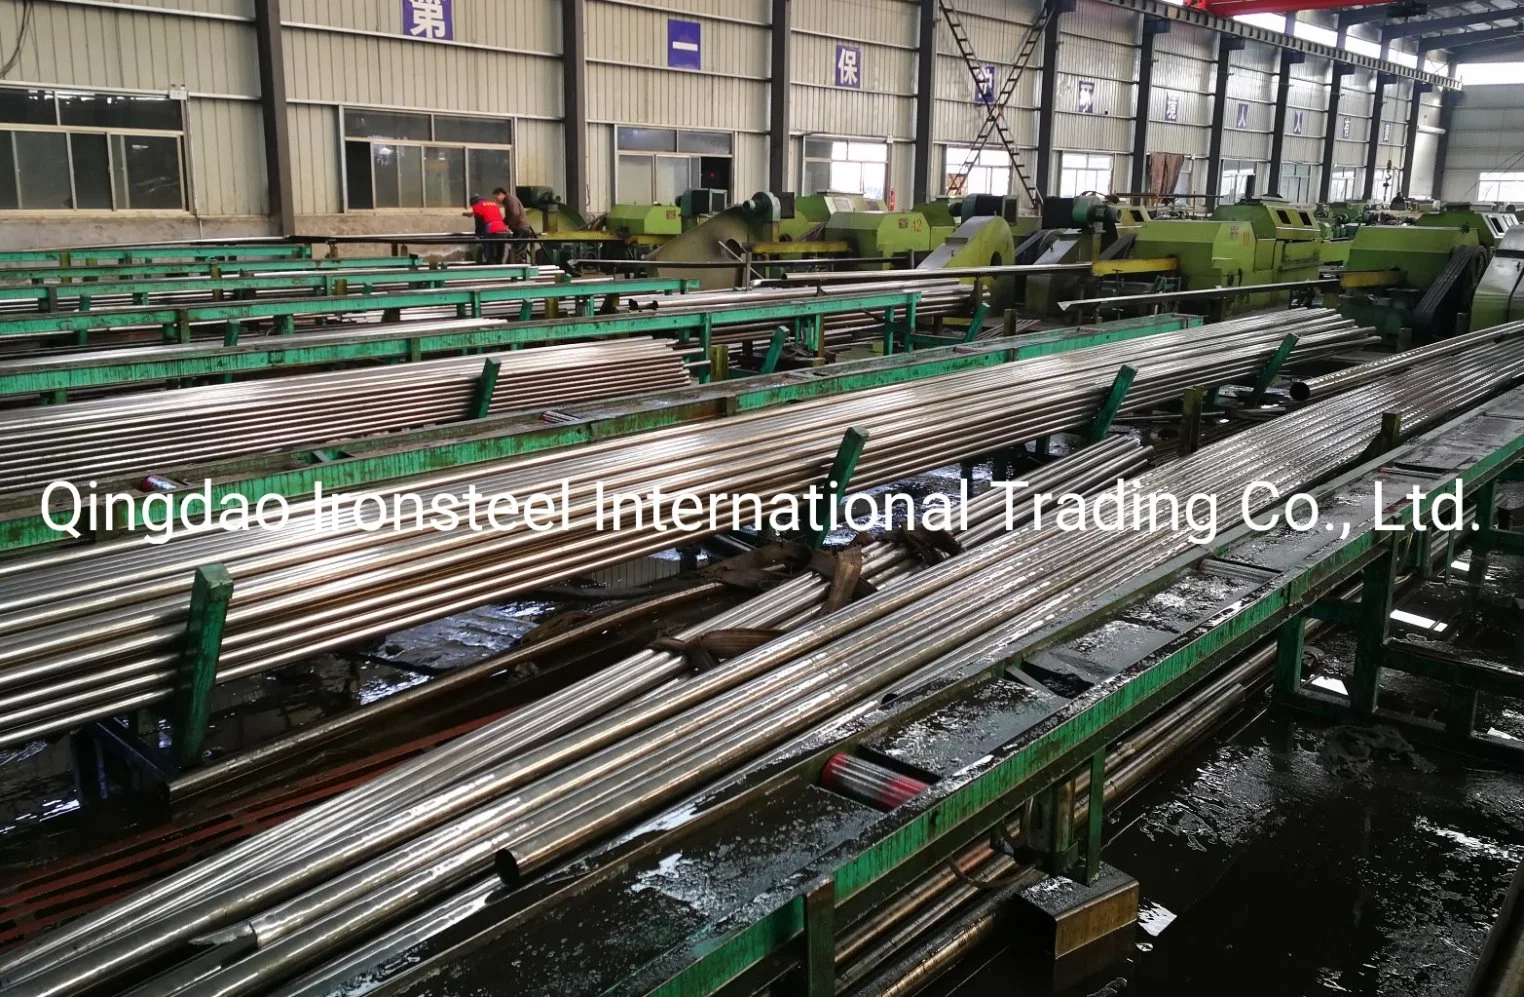 Cold Rolled Cold Drawn Precise Seamless Steel Pipe Steel Tube for Mechanical Making